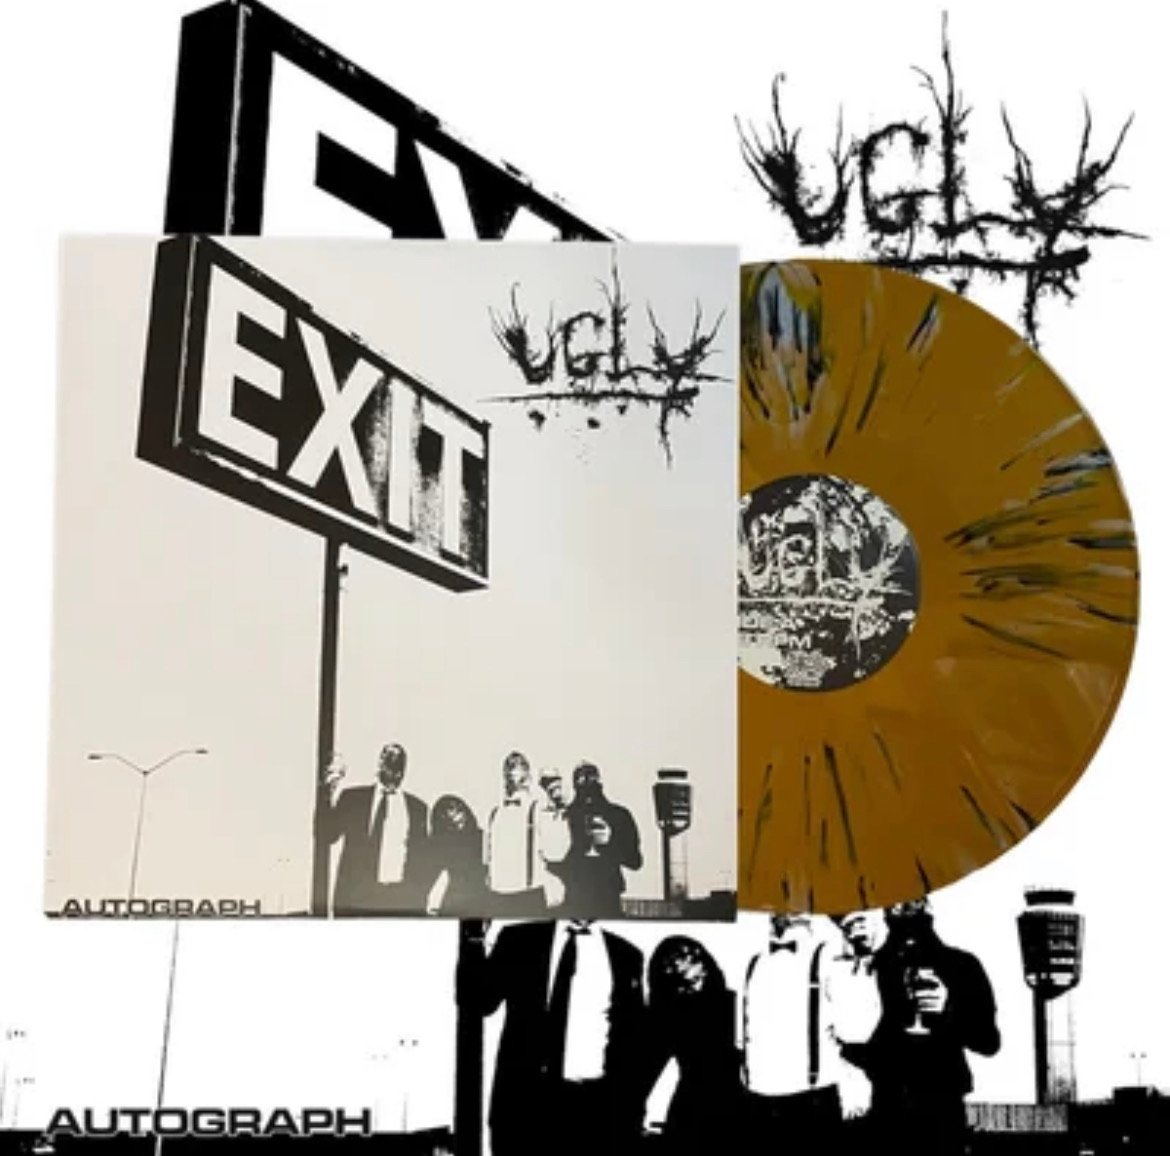 Image of Ugly - "Autograph" LP (Butterscotch) PREORDER